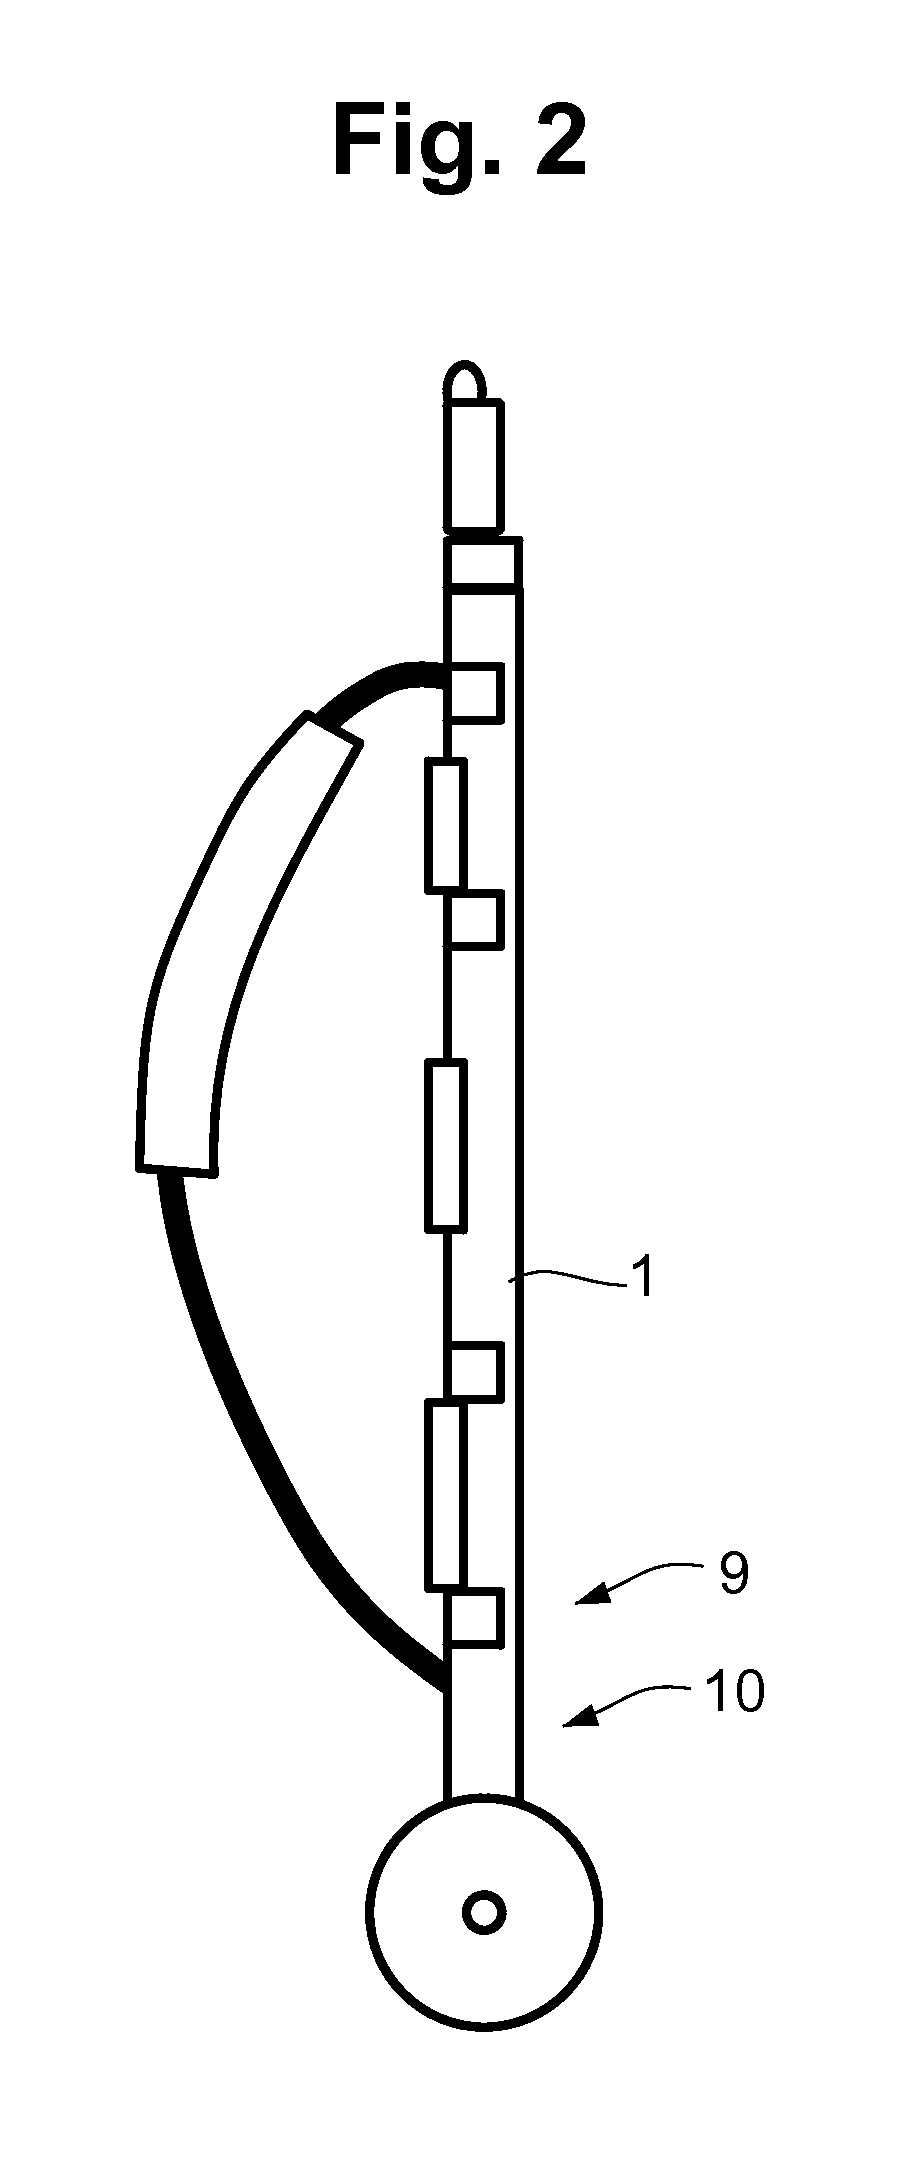 Shoulder-carriable wheeled cart assembly